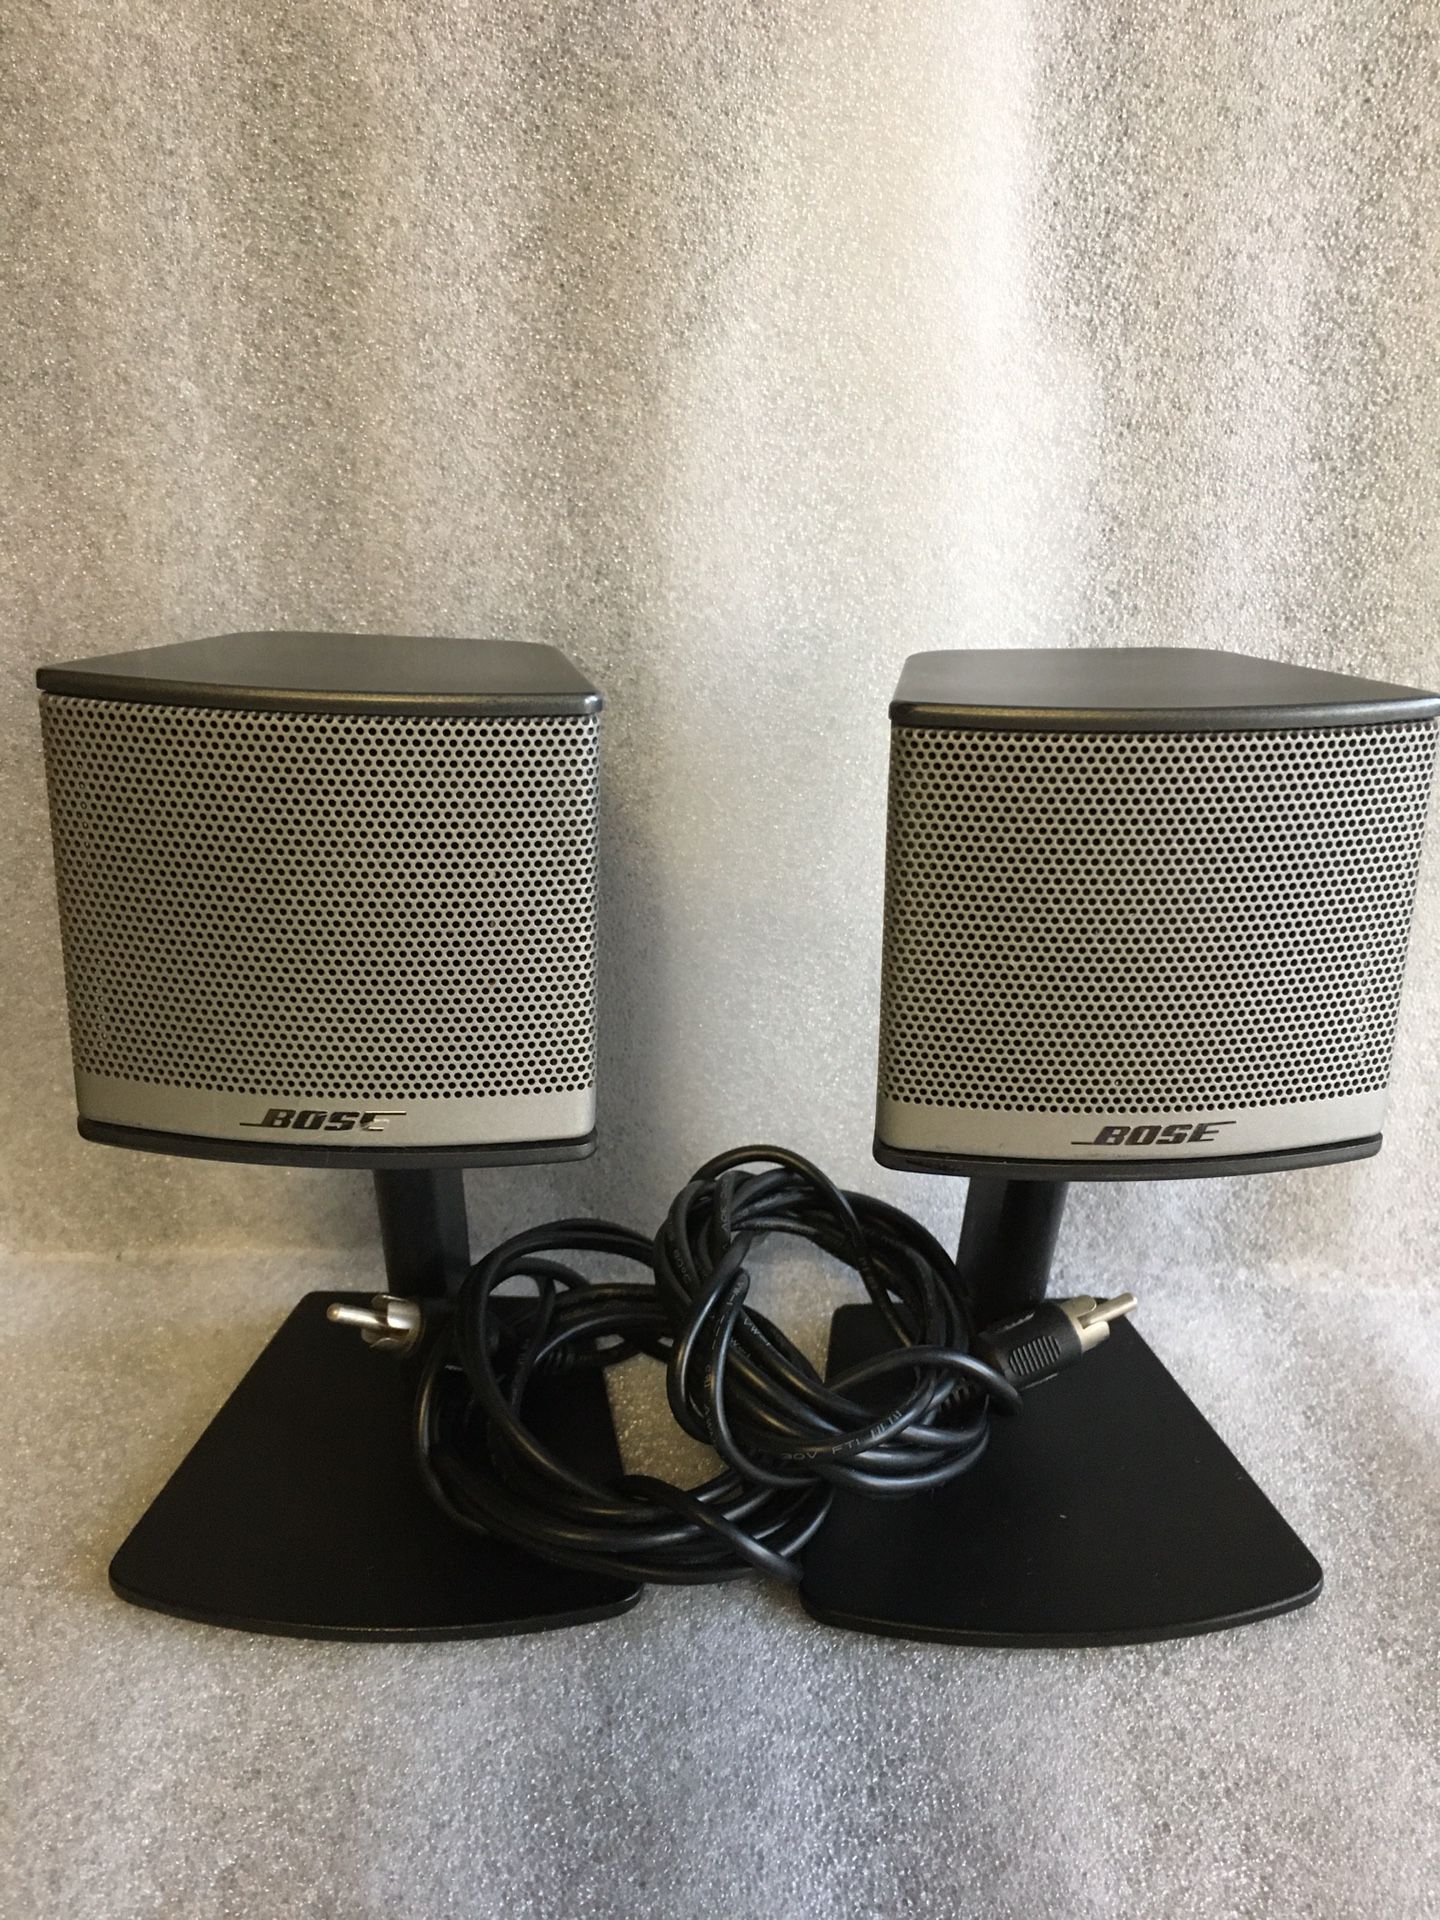 Bose companion 3 Satellite Speakers. Very good working condition.